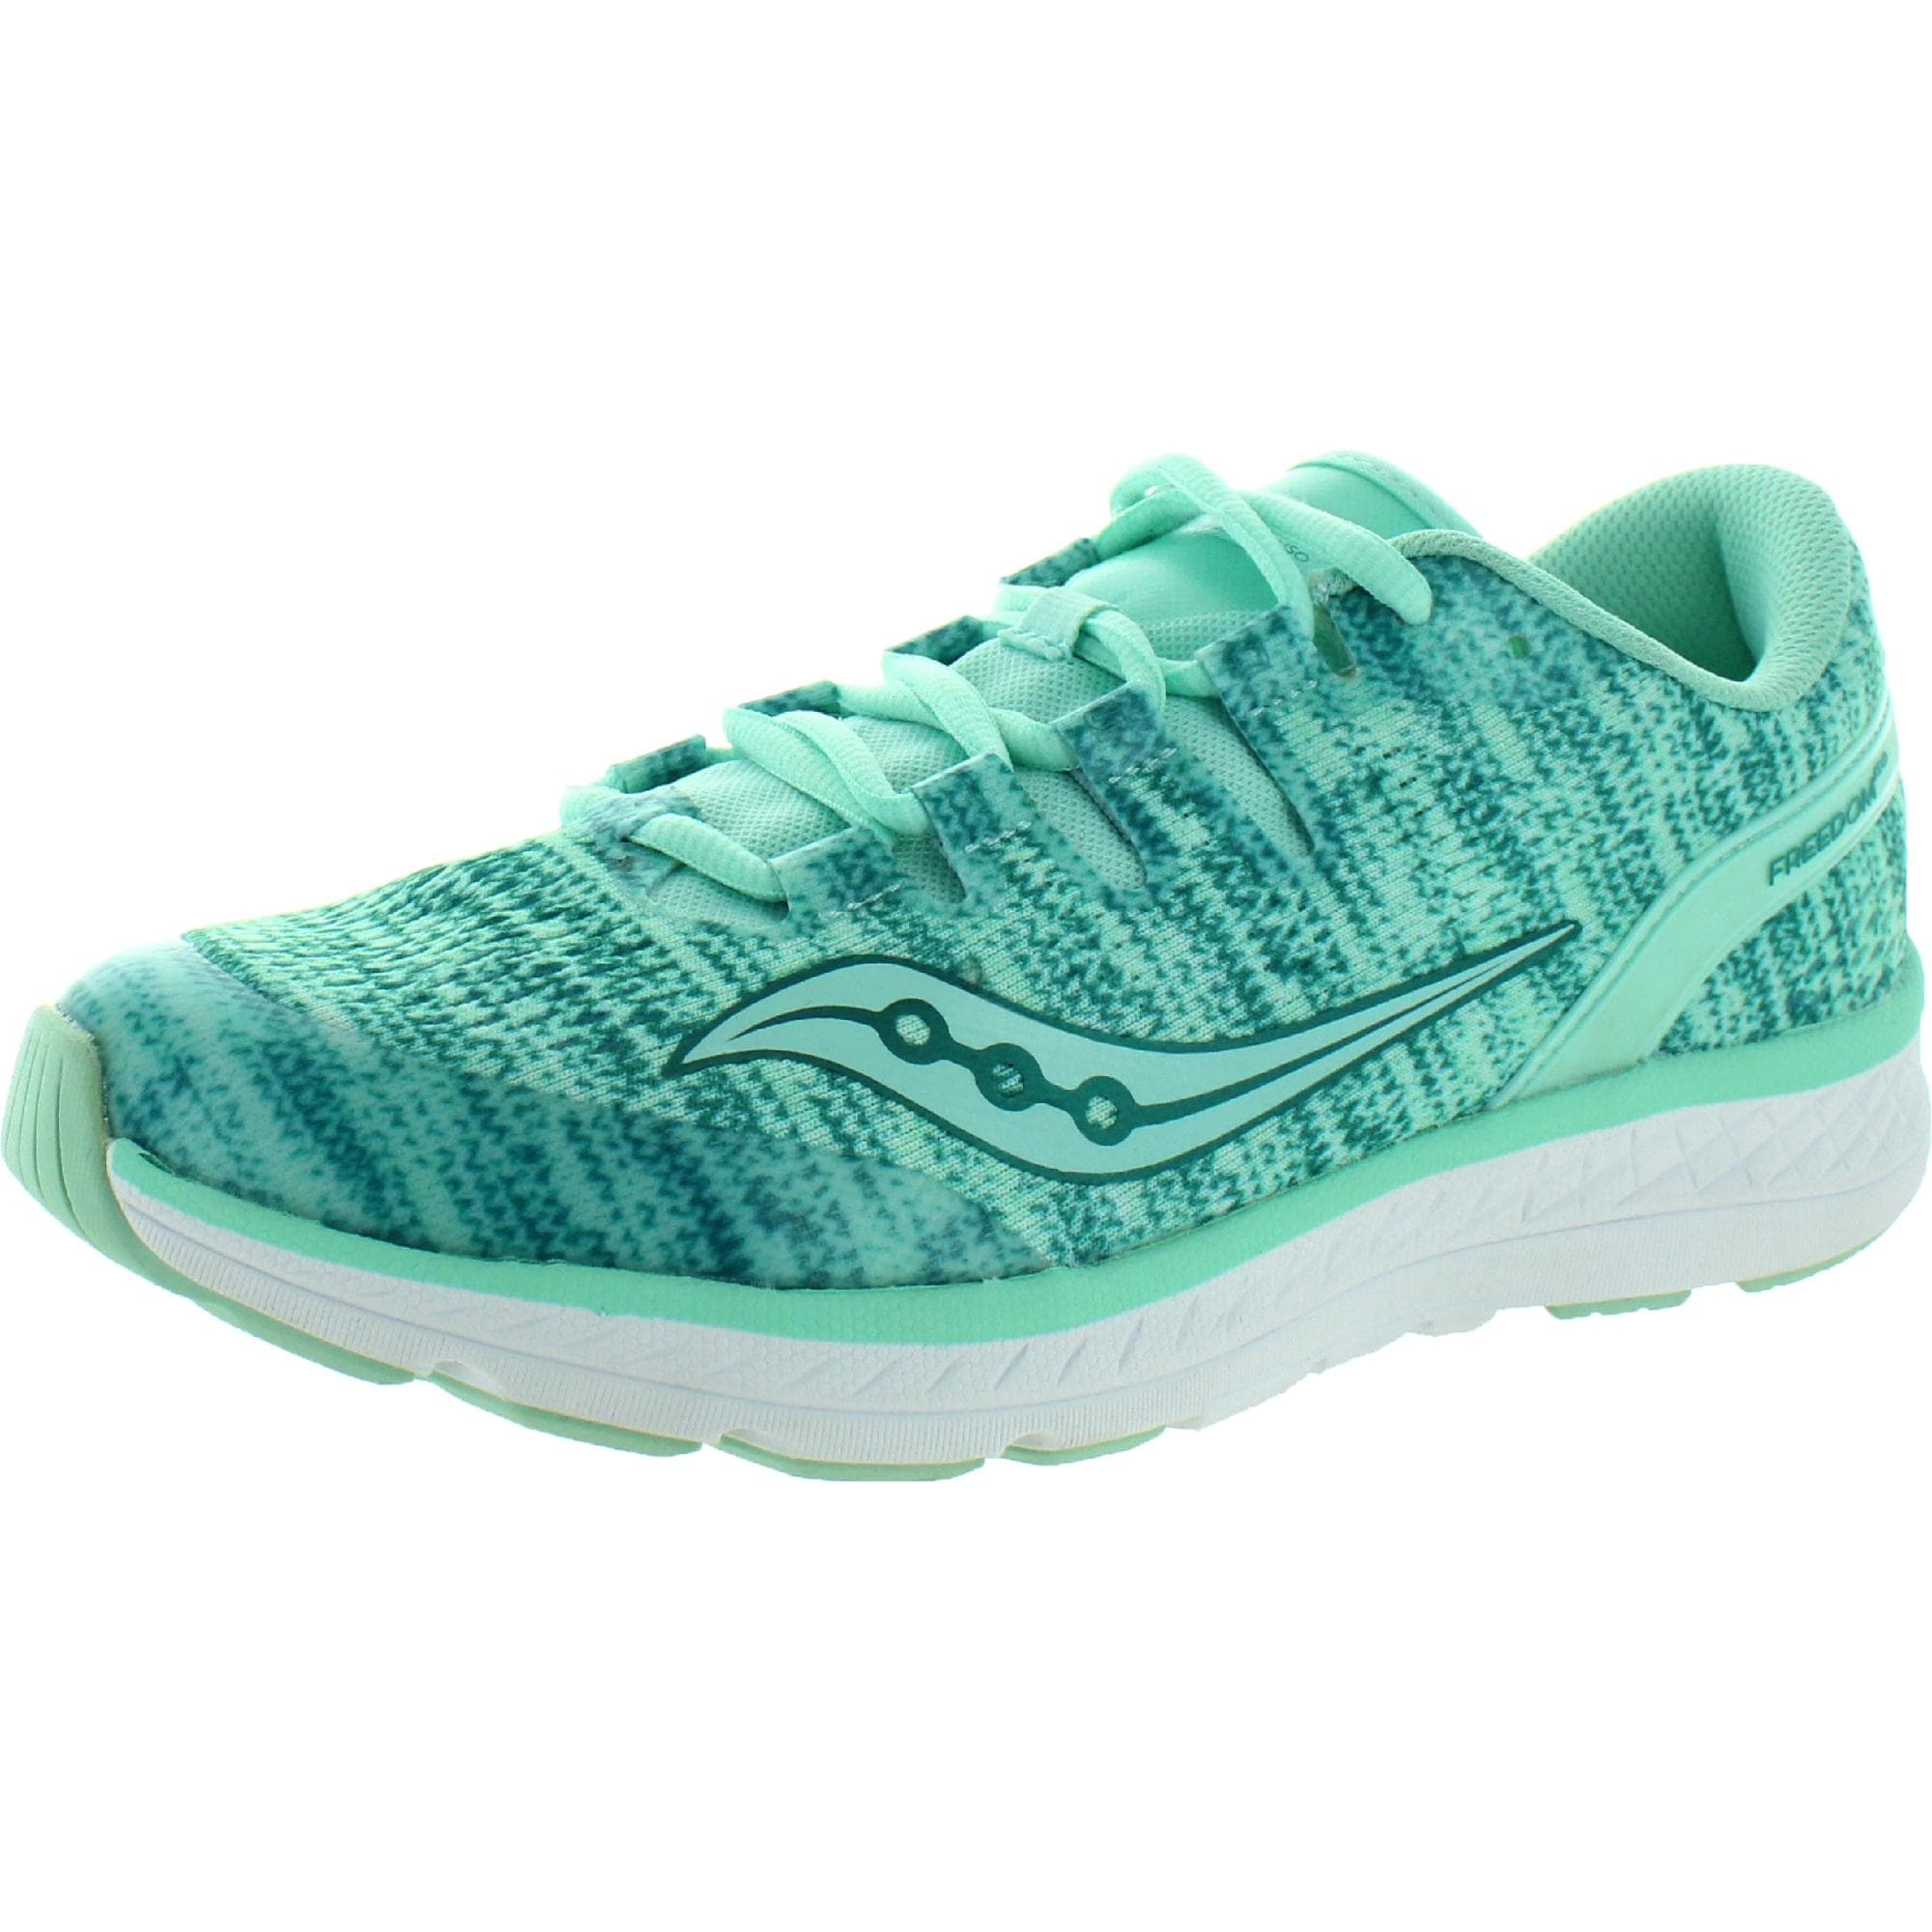 saucony girls running shoes